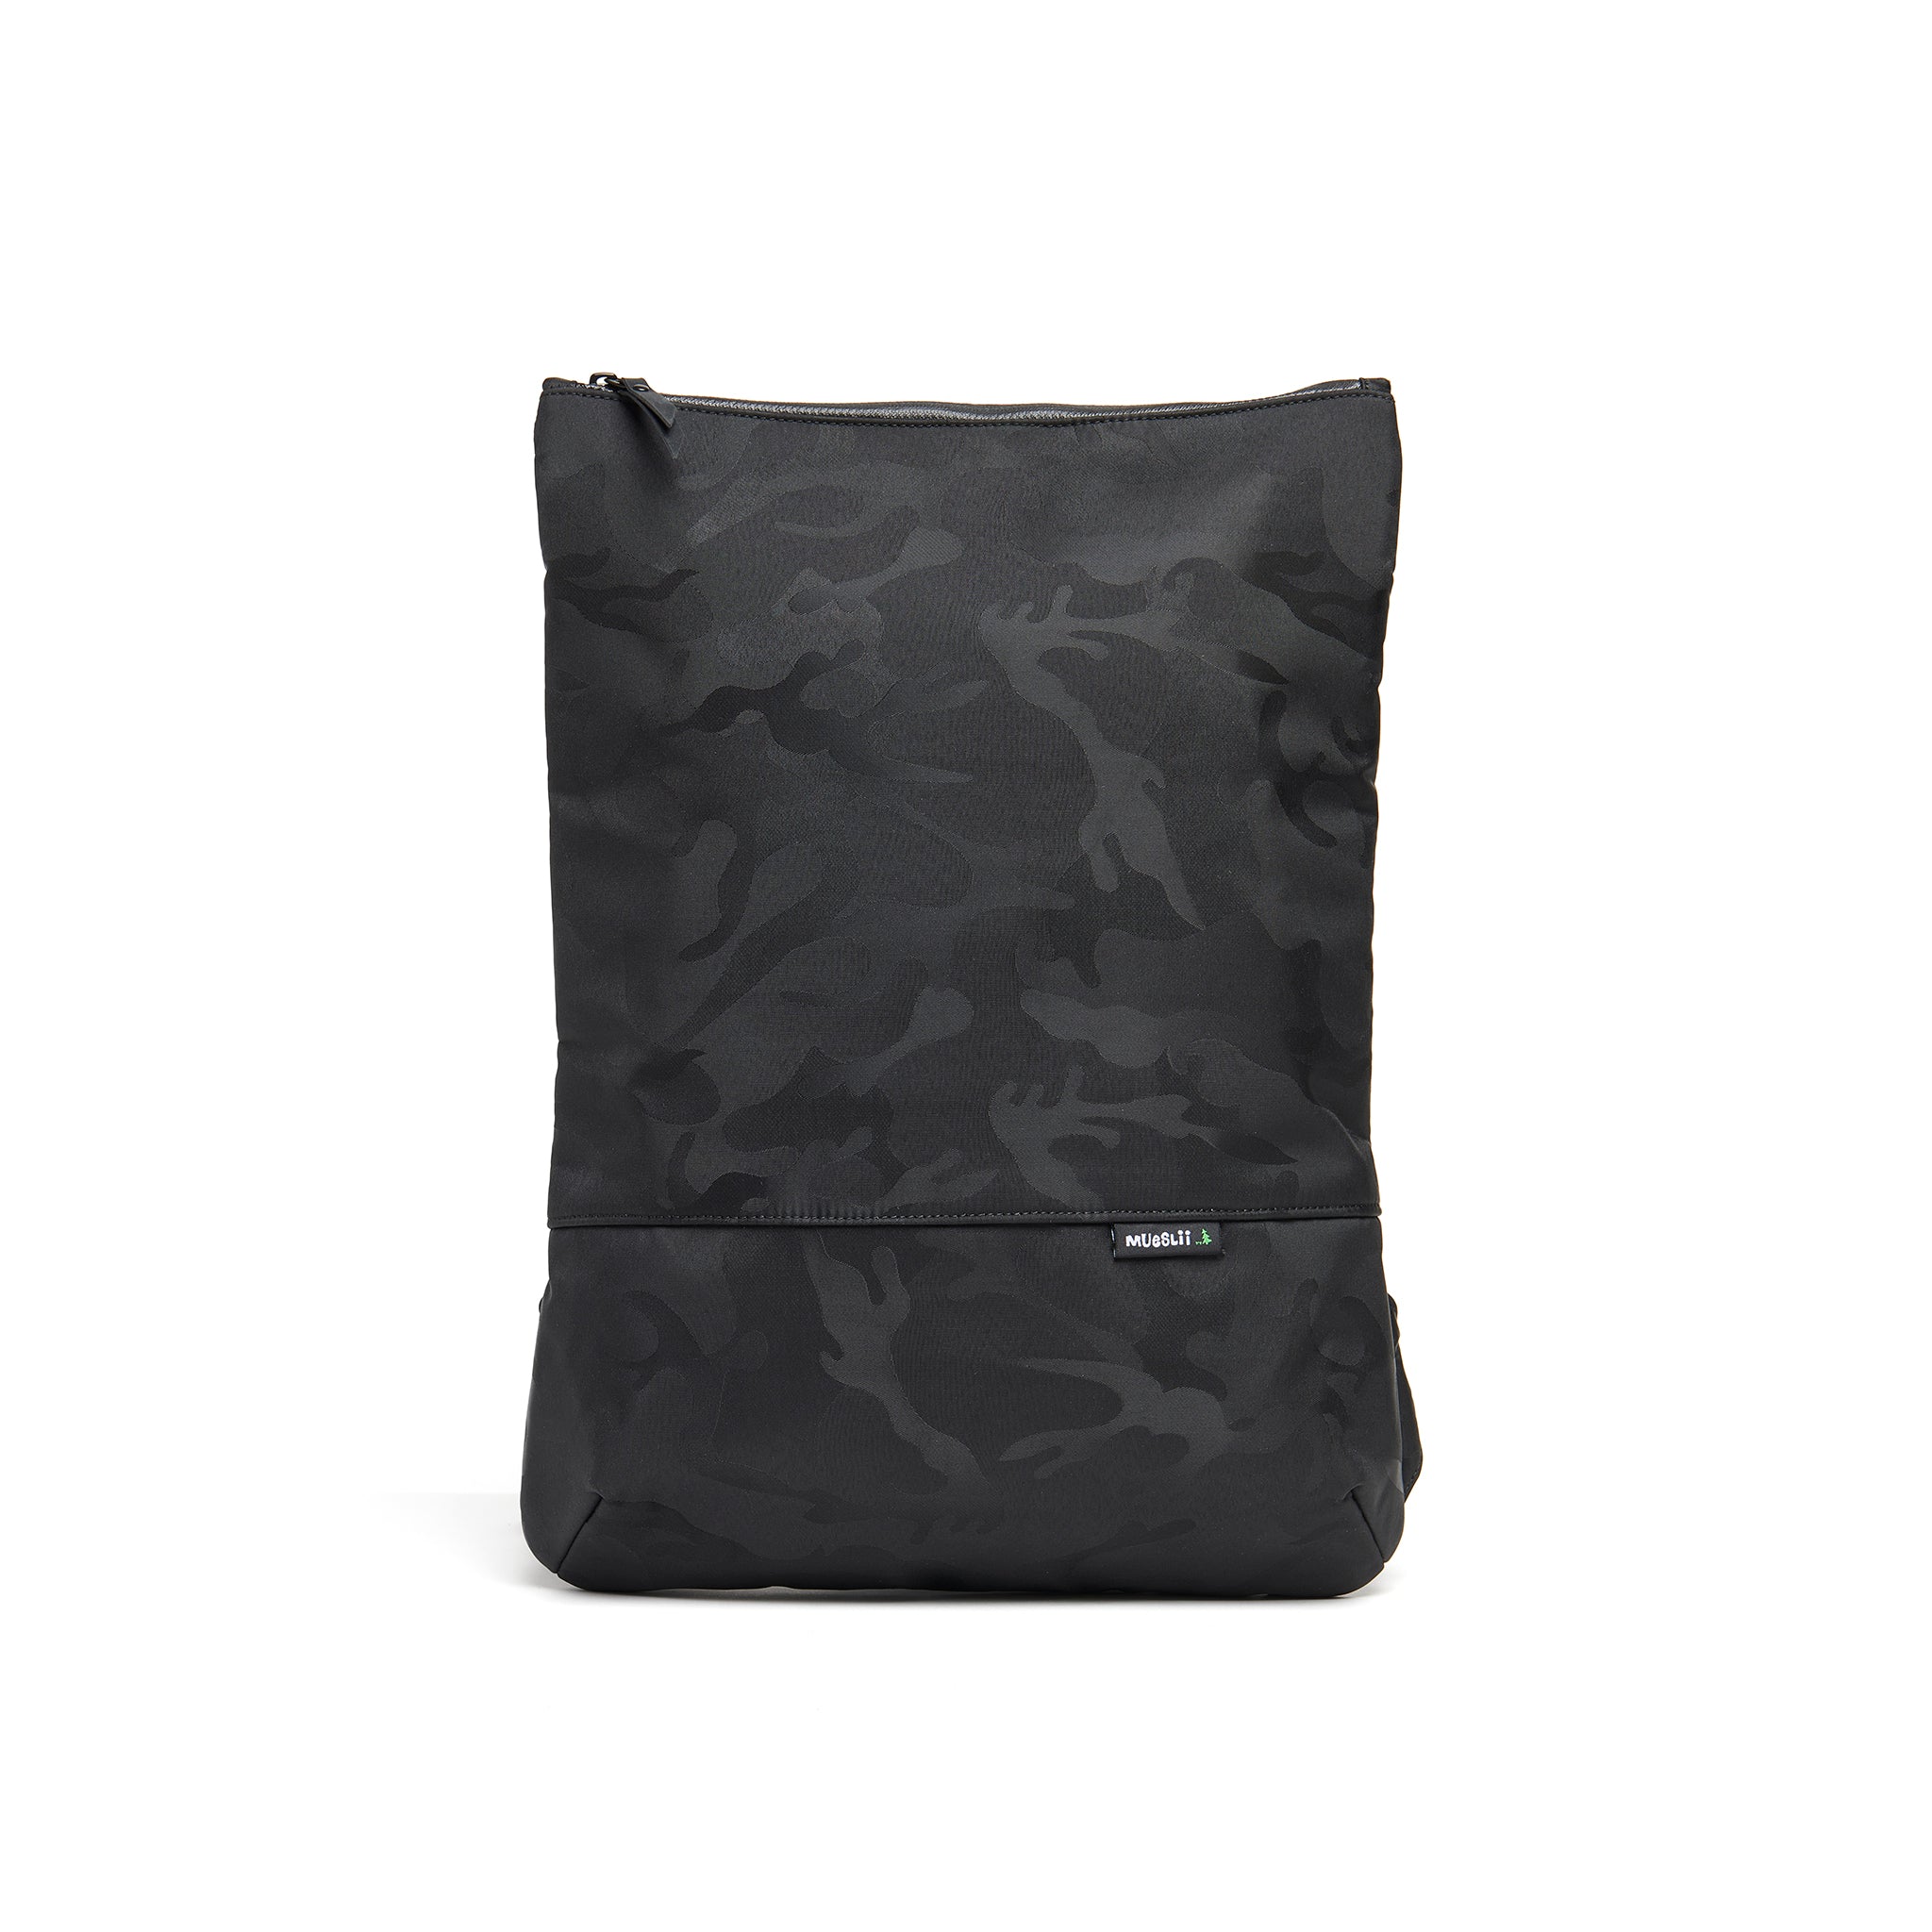 Mueslii light backpack, made of jacquard  waterproof nylon, with a laptop compartment, pattern camouflage, color black, front view.